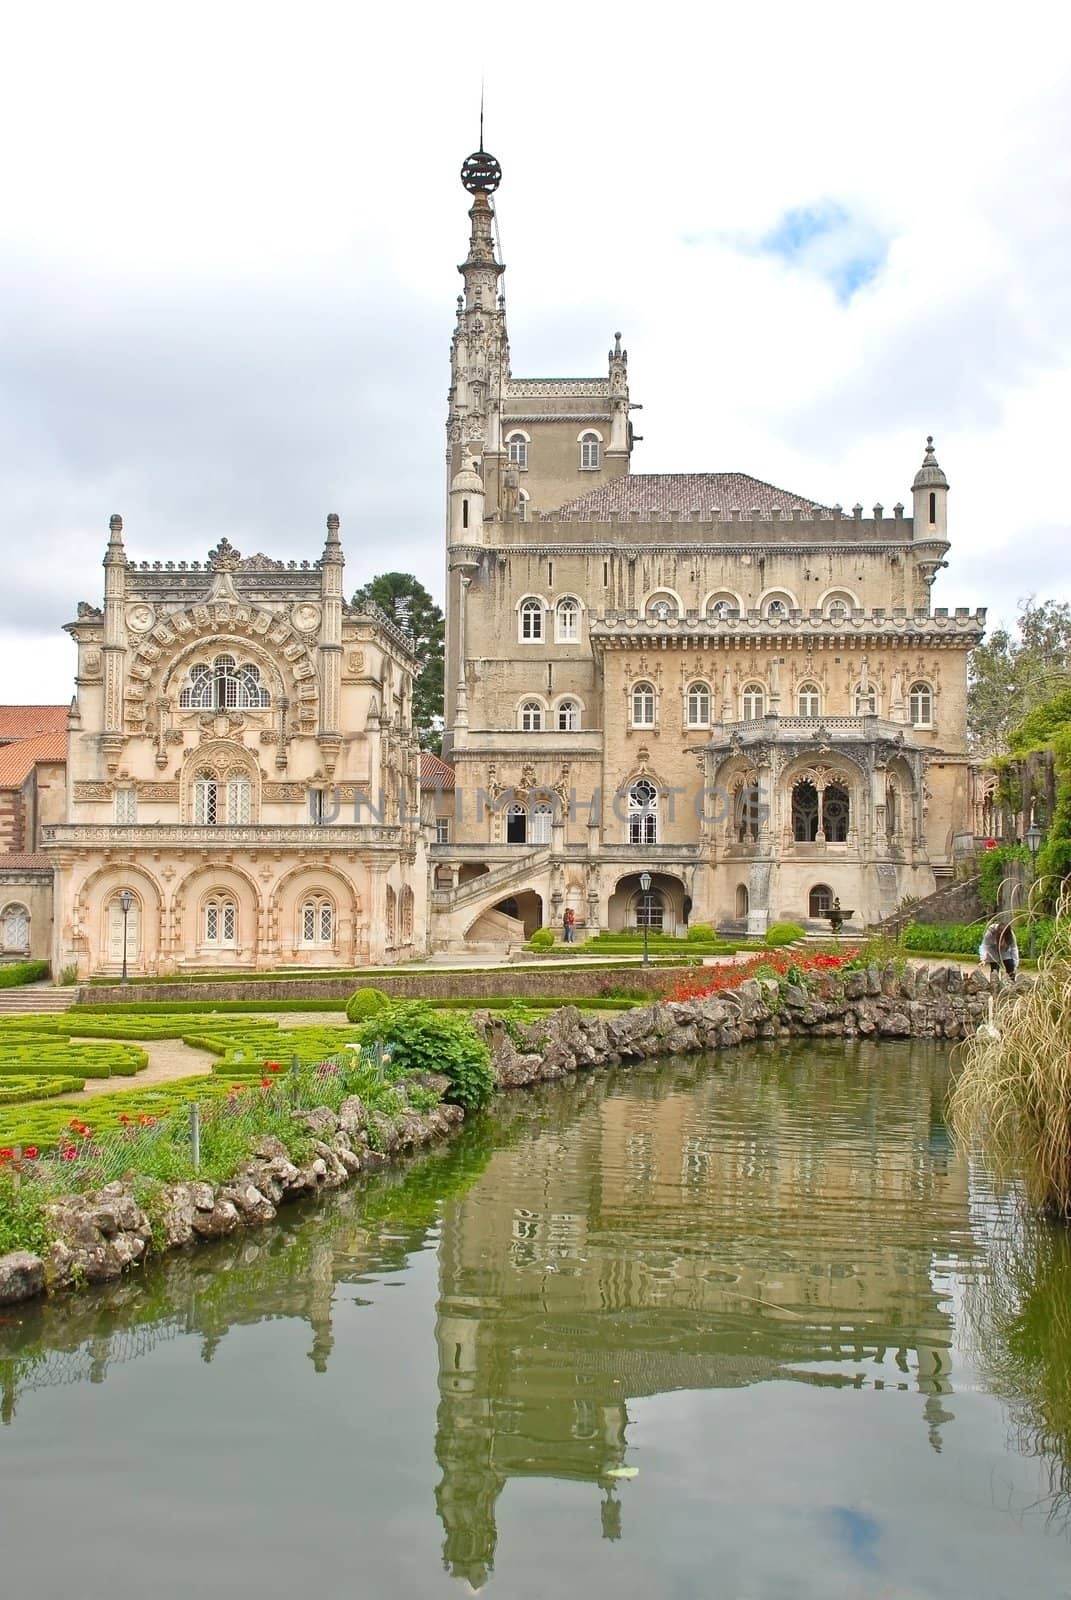 The Bucaco or Bussaco Palace - the beautiful manueline style architectural model, Portugal